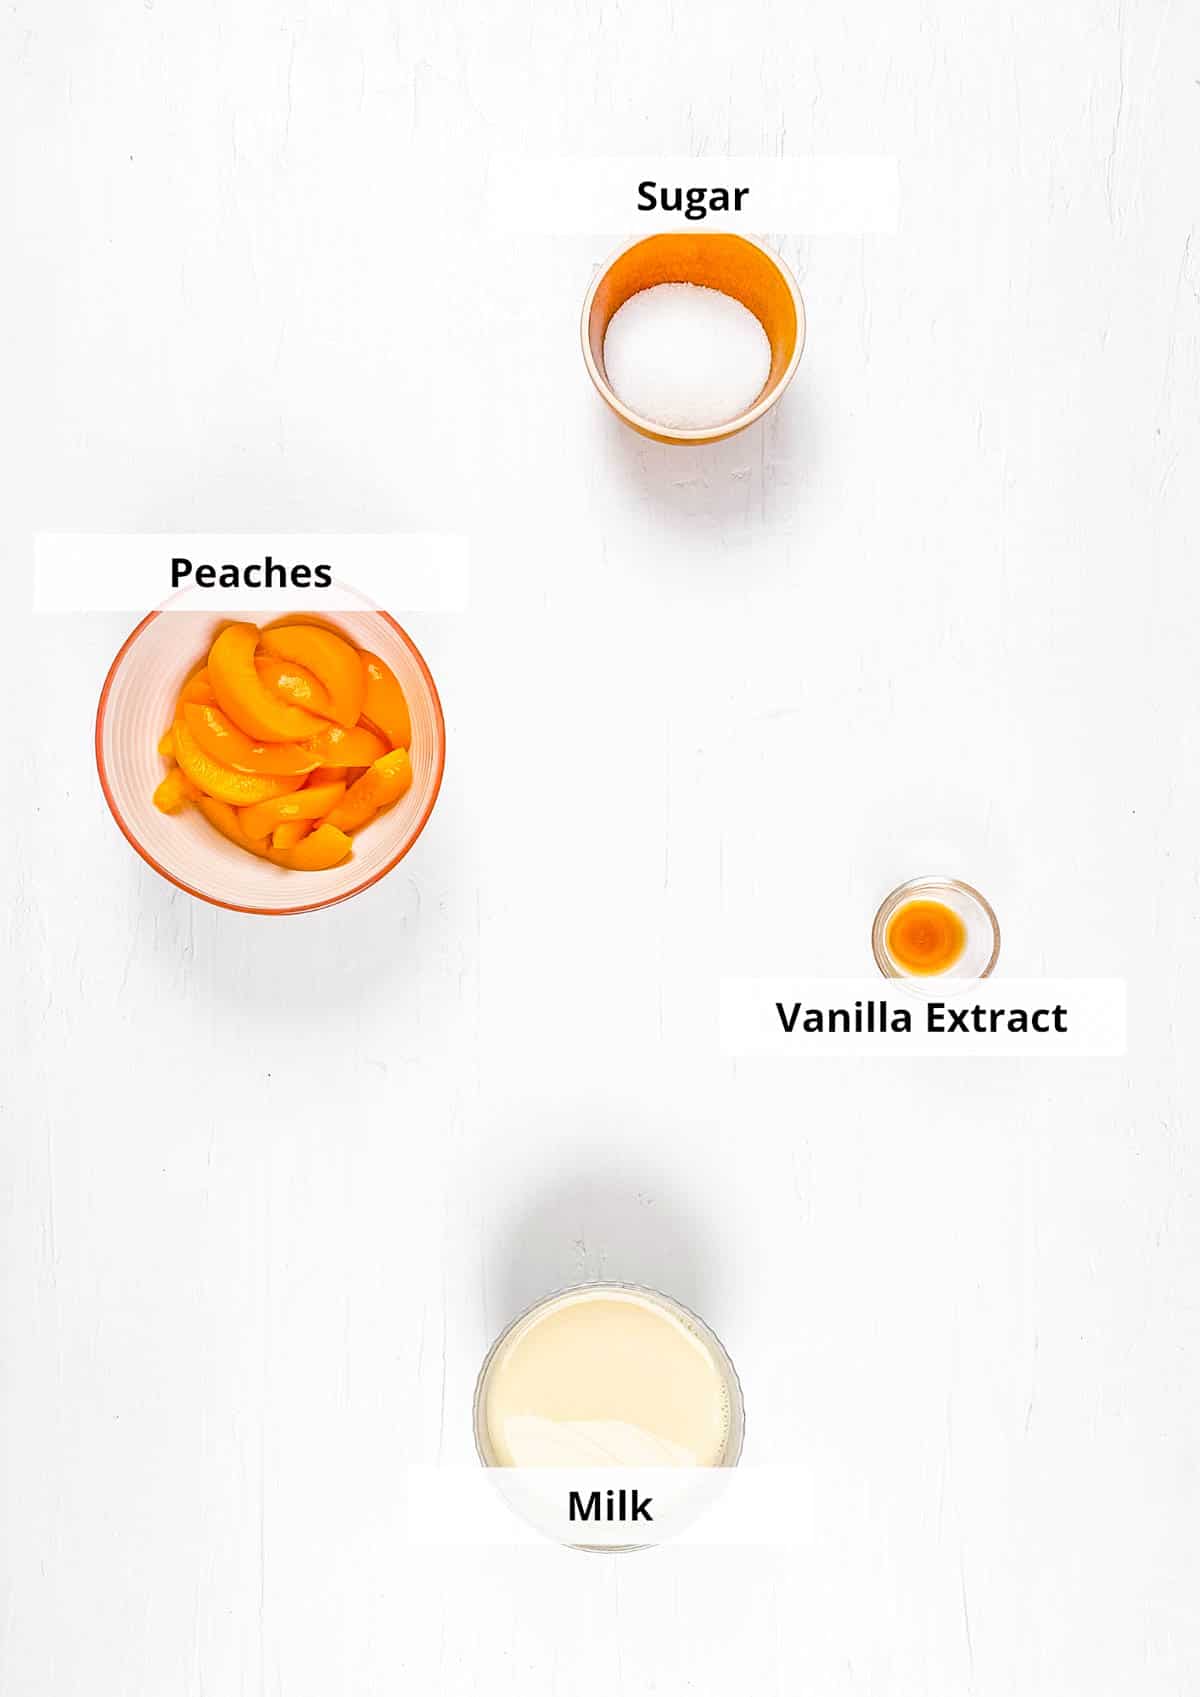 Ingredients for easy peach milk recipe on white background.